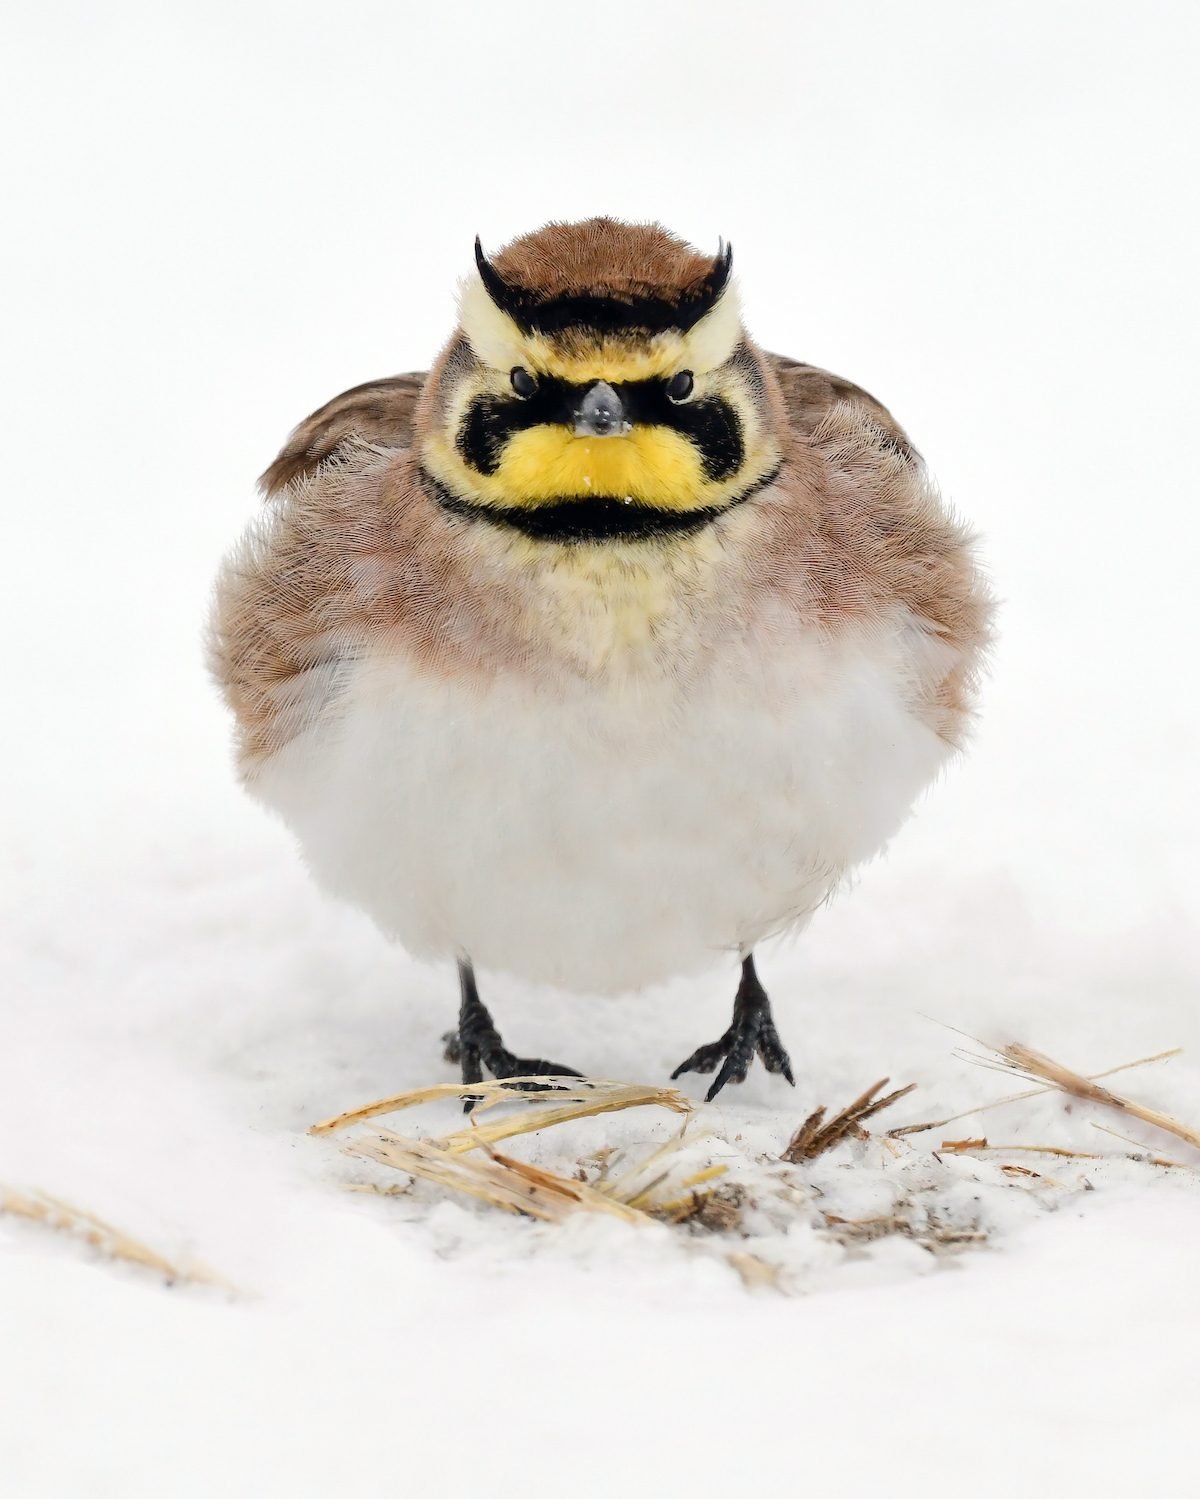 20 Grumpy Bird Pictures to Turn Your Frown Upside-Down